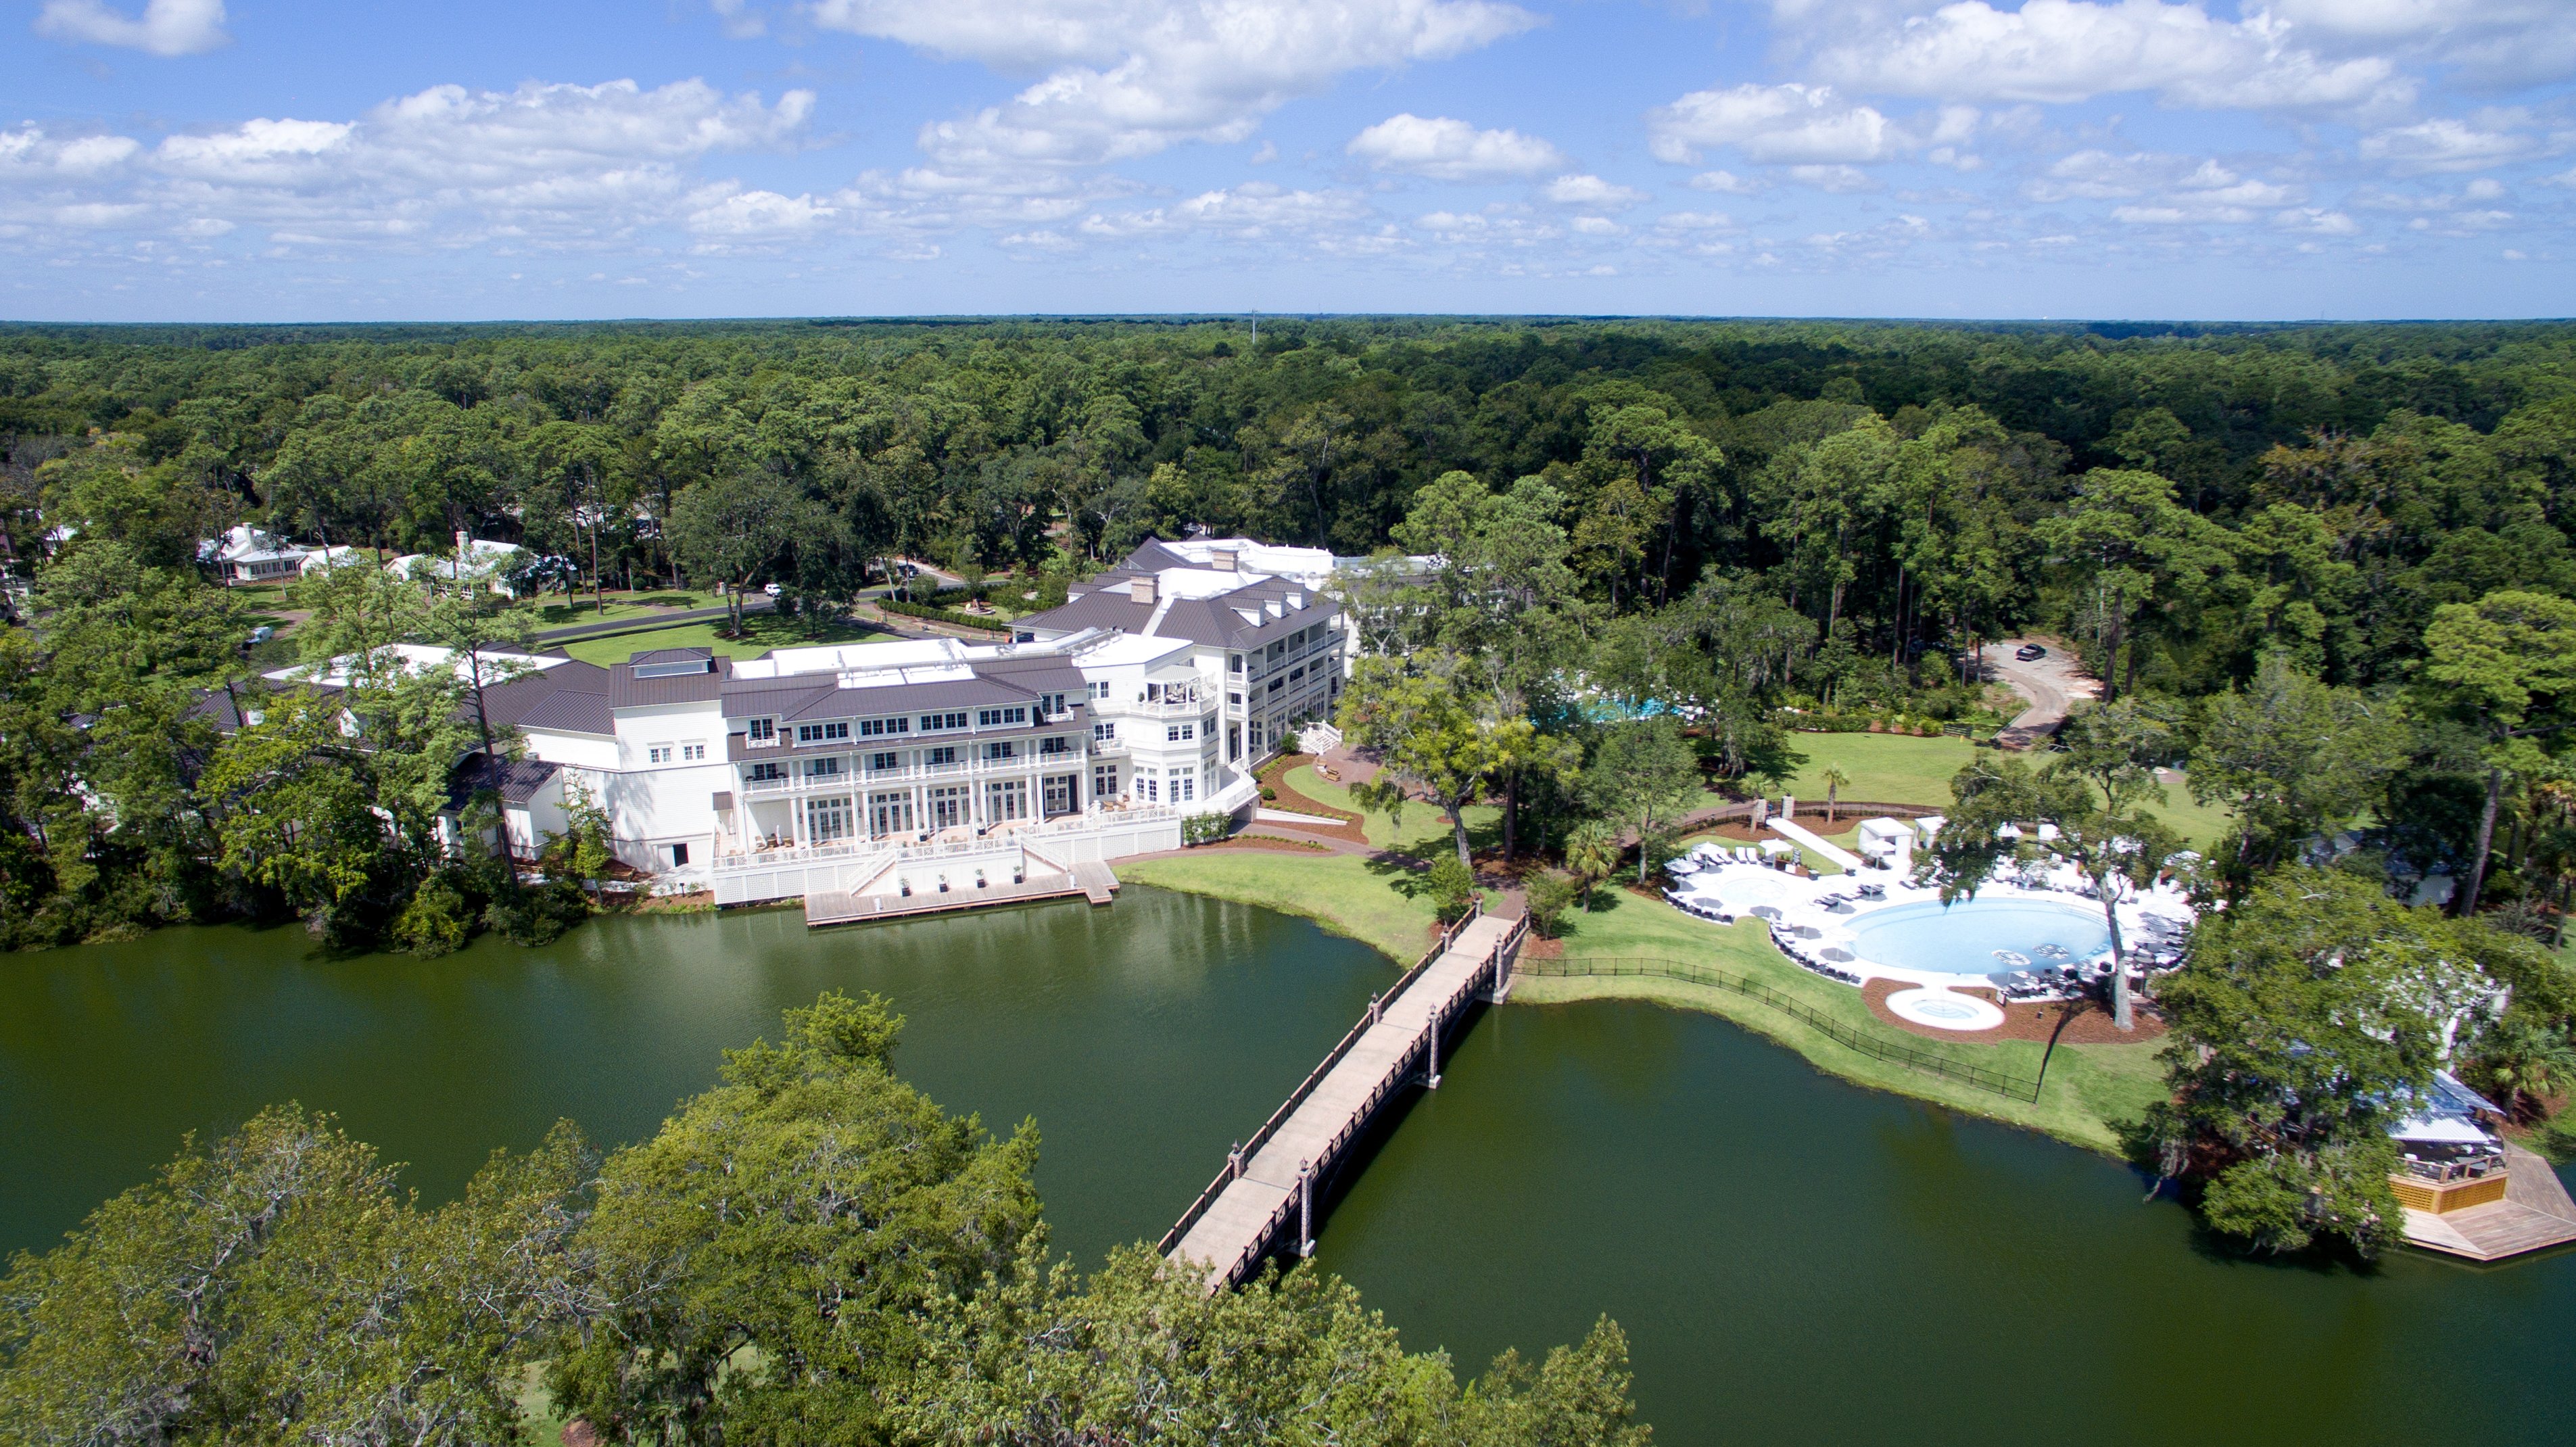 The Montage Palmetto Bluff in Bluffton SC welcomed 150 new rooms and a host of other additions as the property completes 